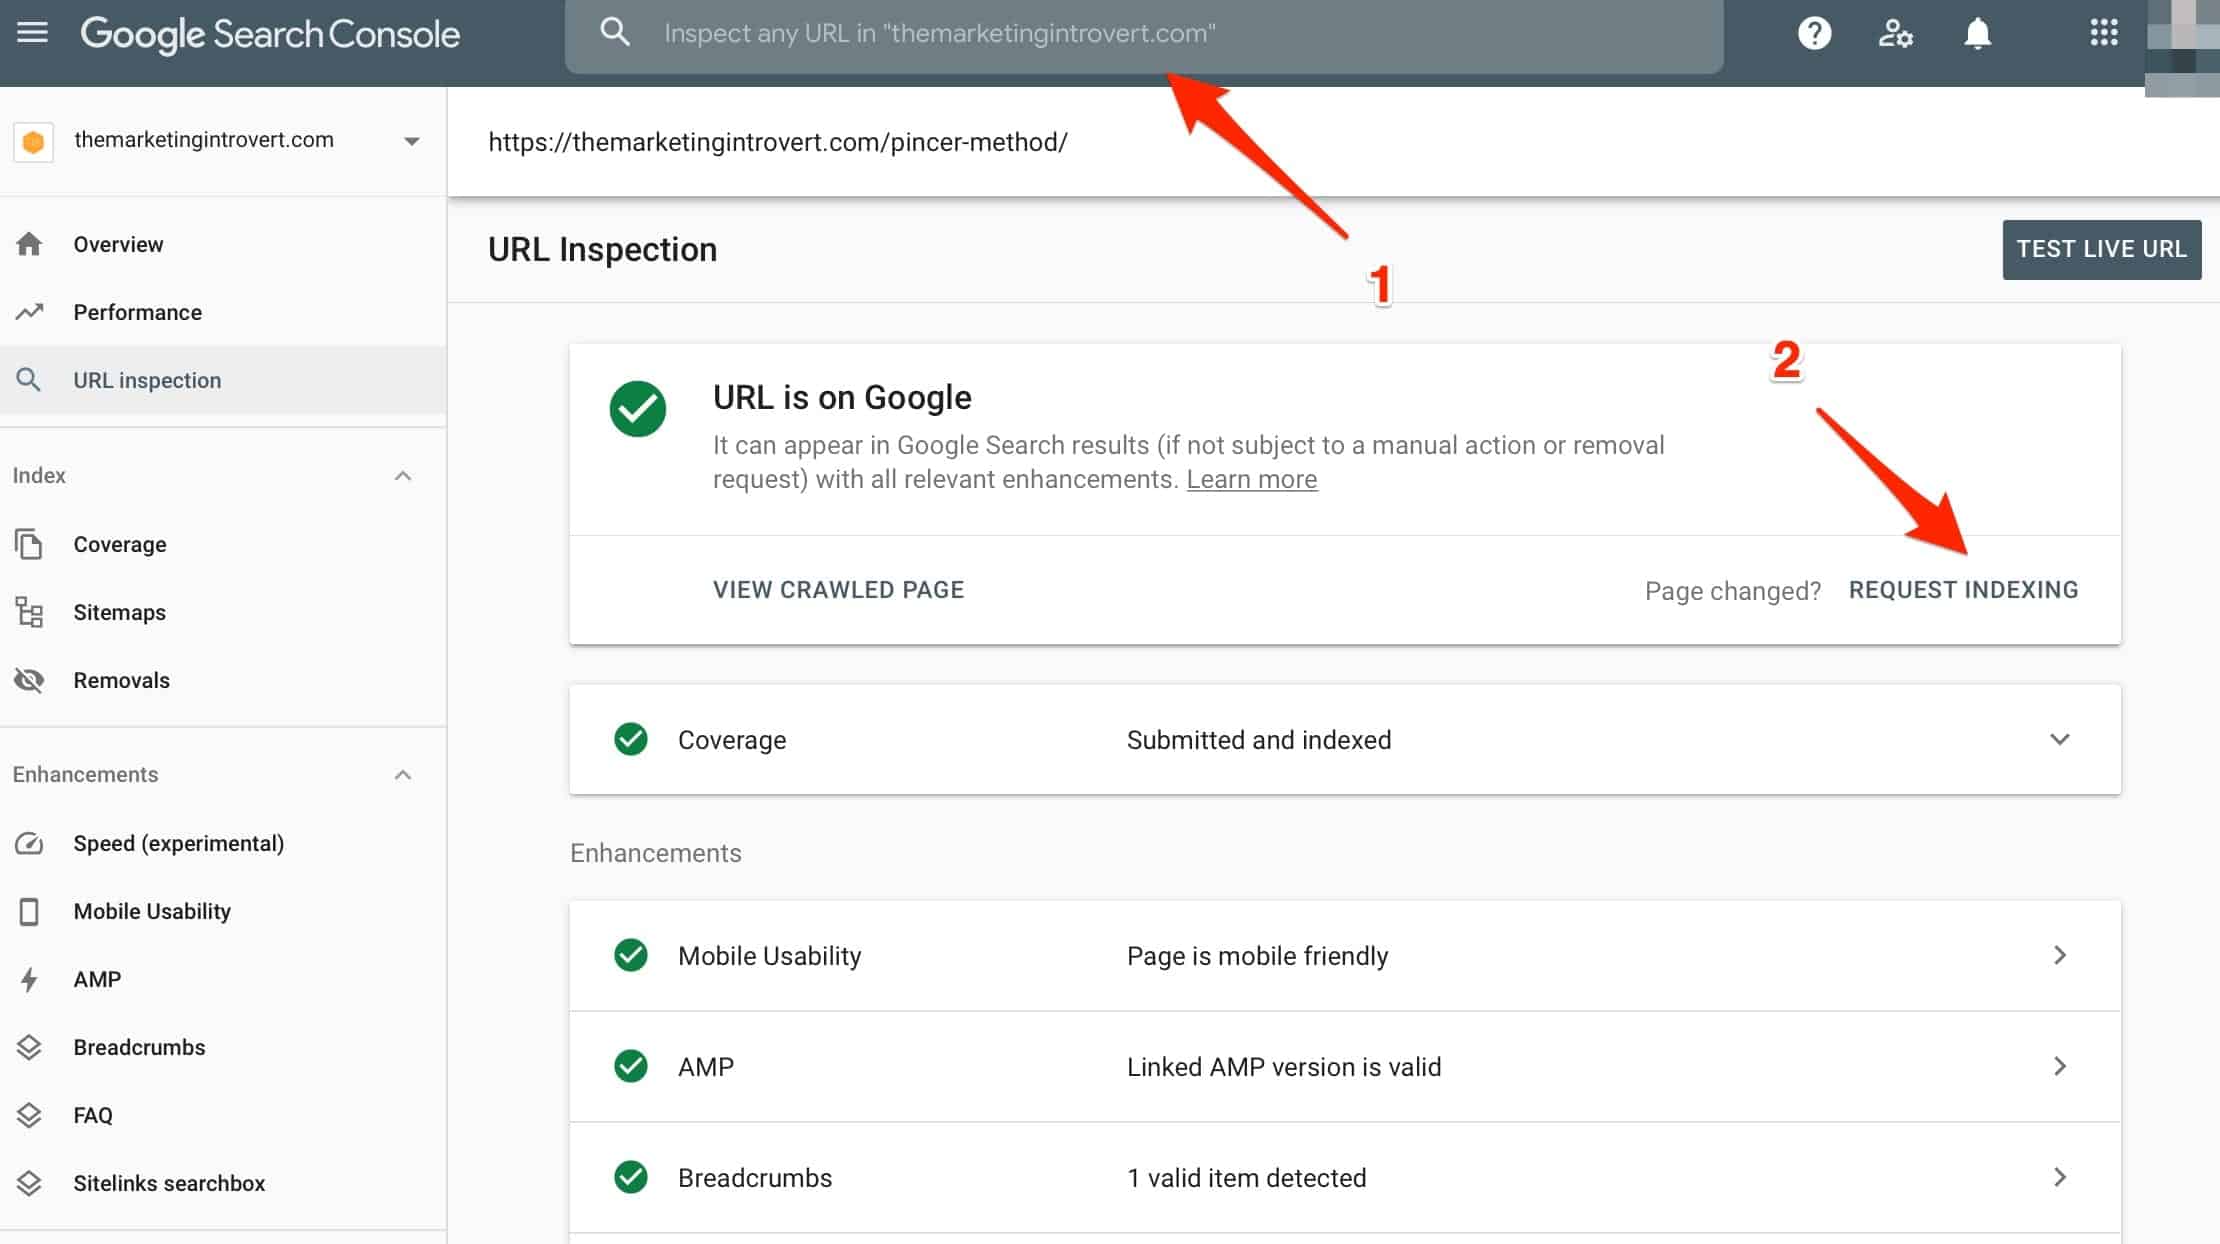 Submit URL for re-indexing in Search Console